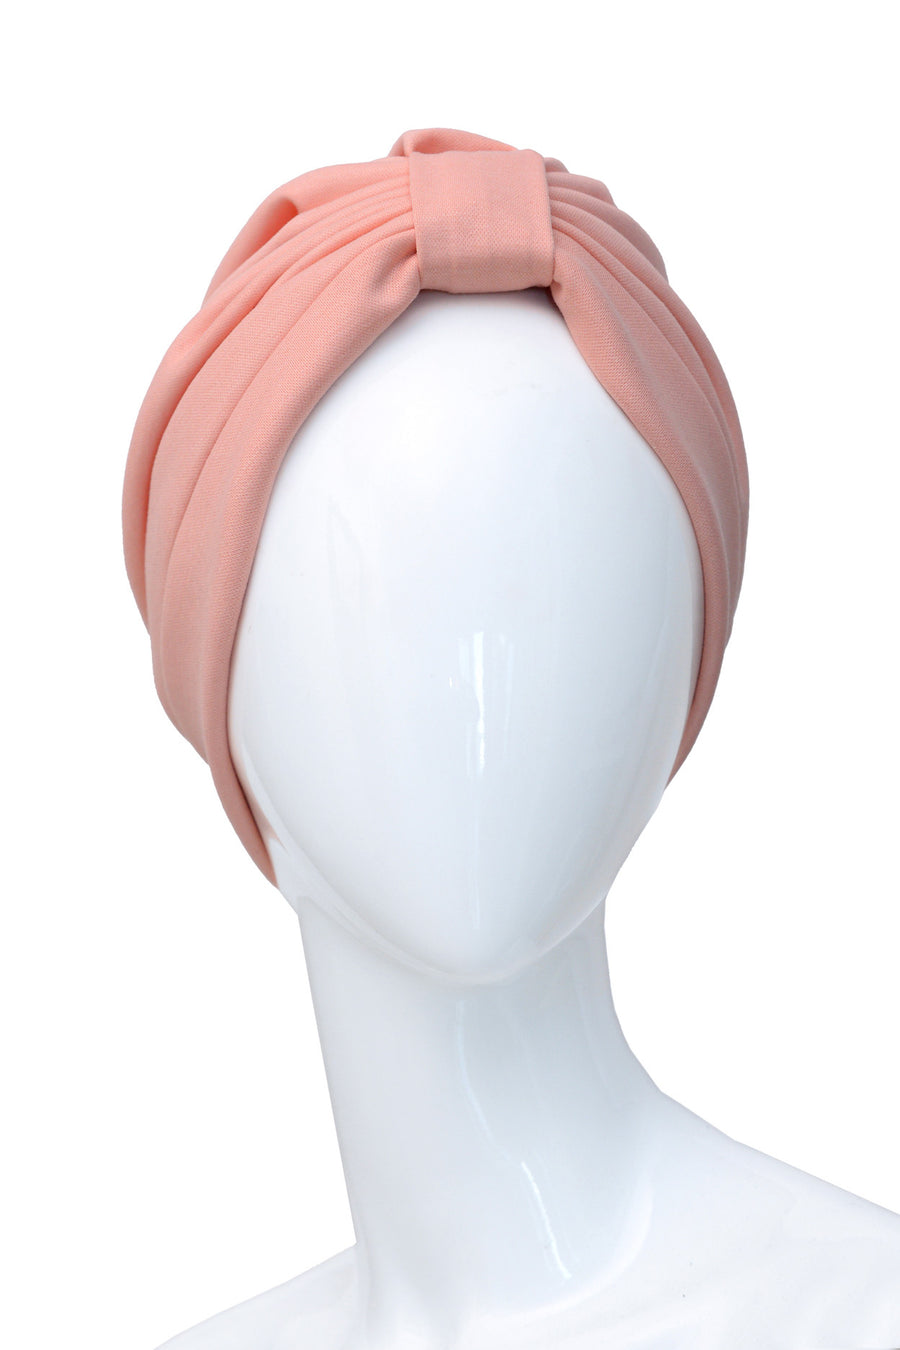 VOILTAIRE Pink turban in cotton Extensible